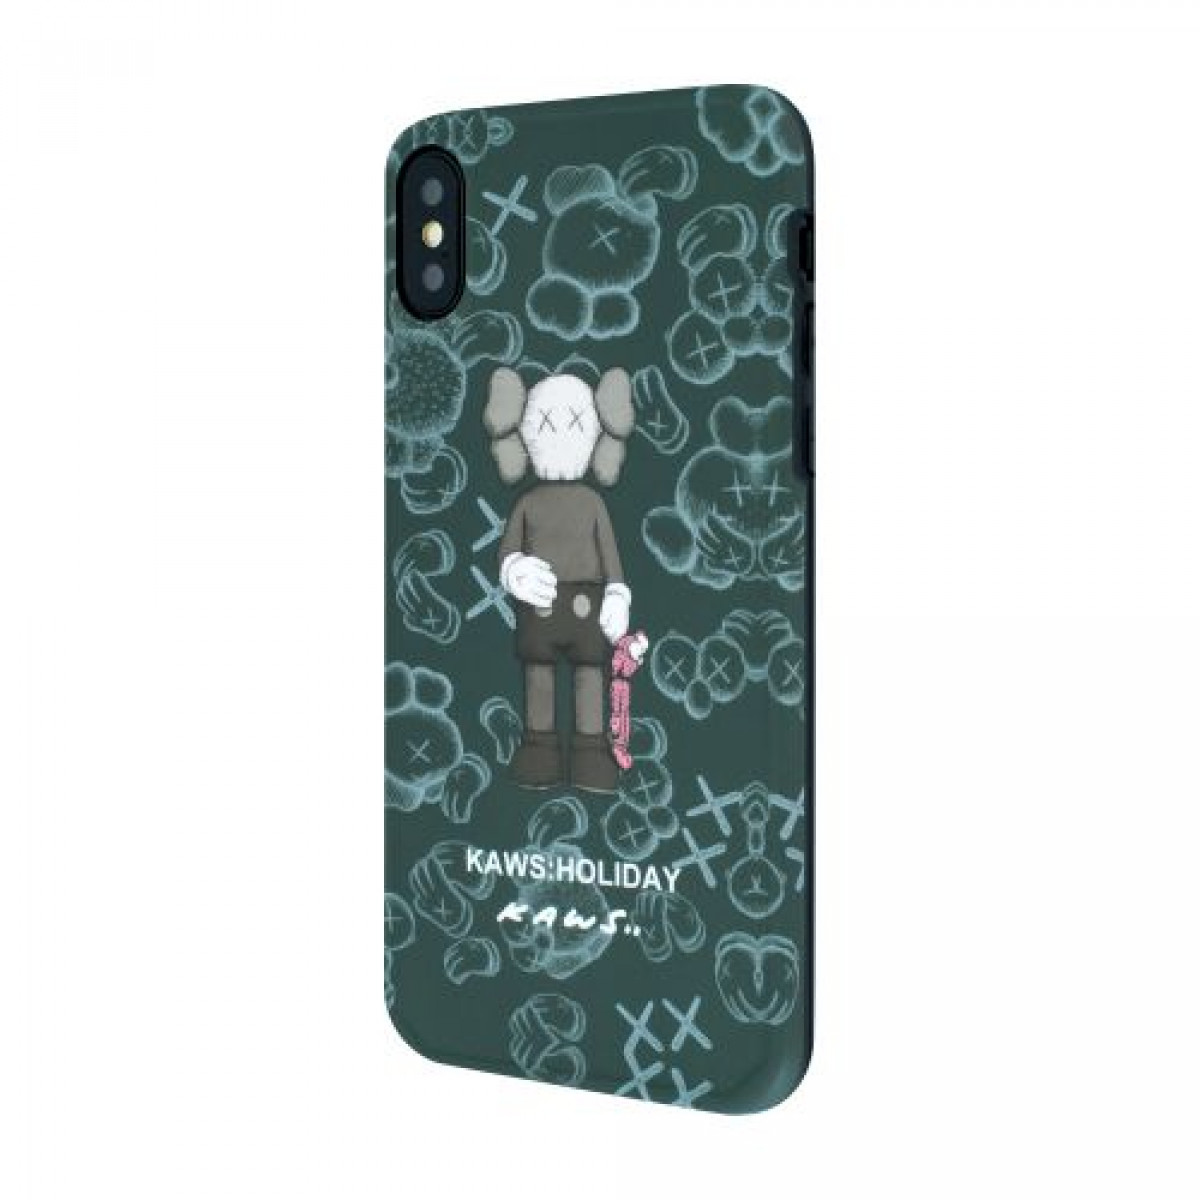 IMD Print Kaws Holiday Case for iPhone XS Max